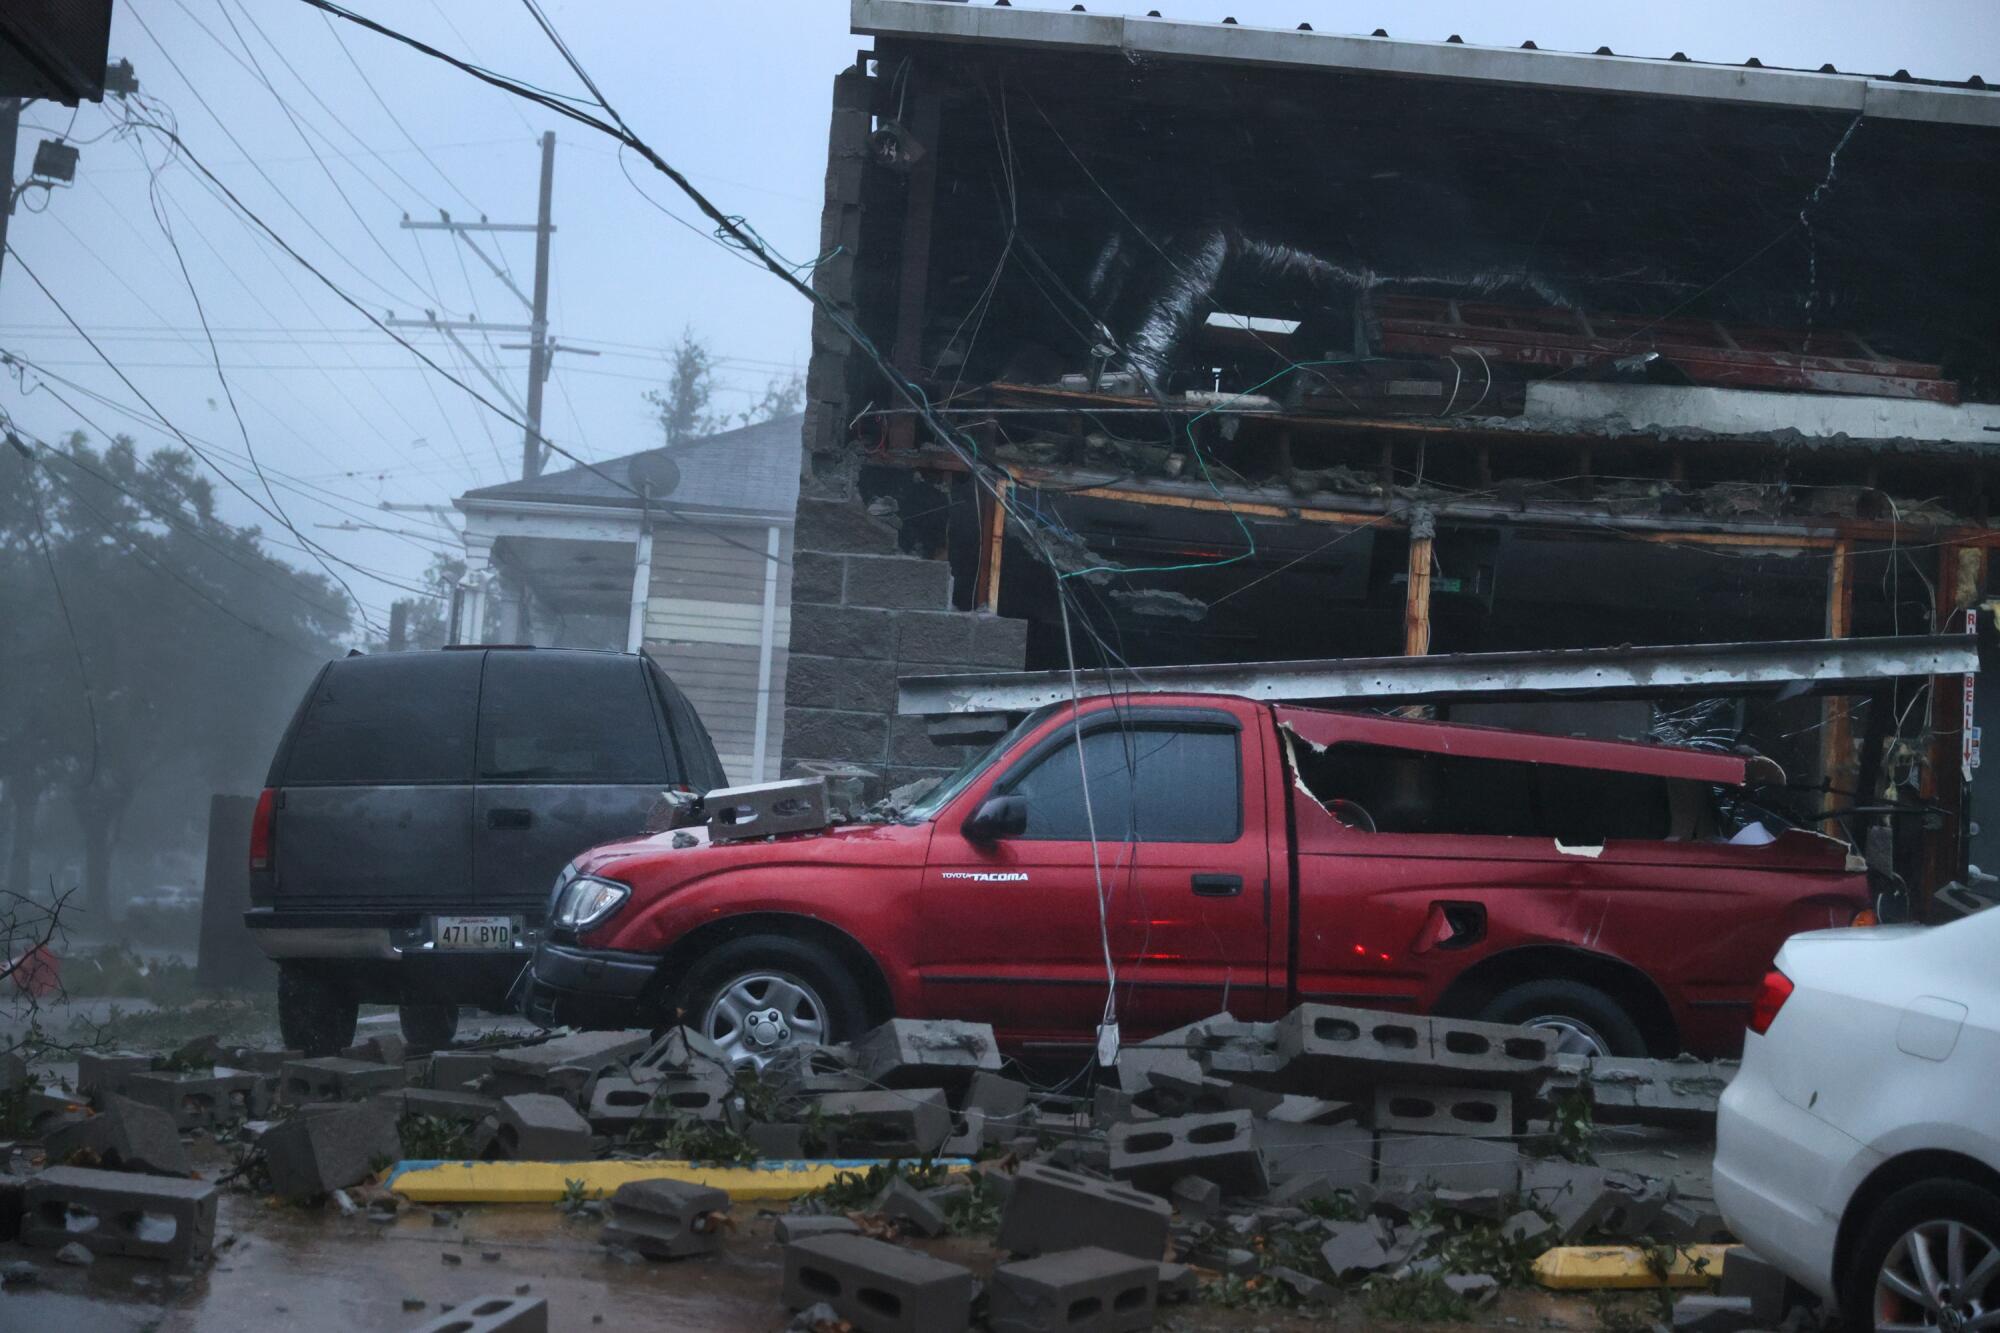 Vehicles are damaged after the front of a building collapsed.